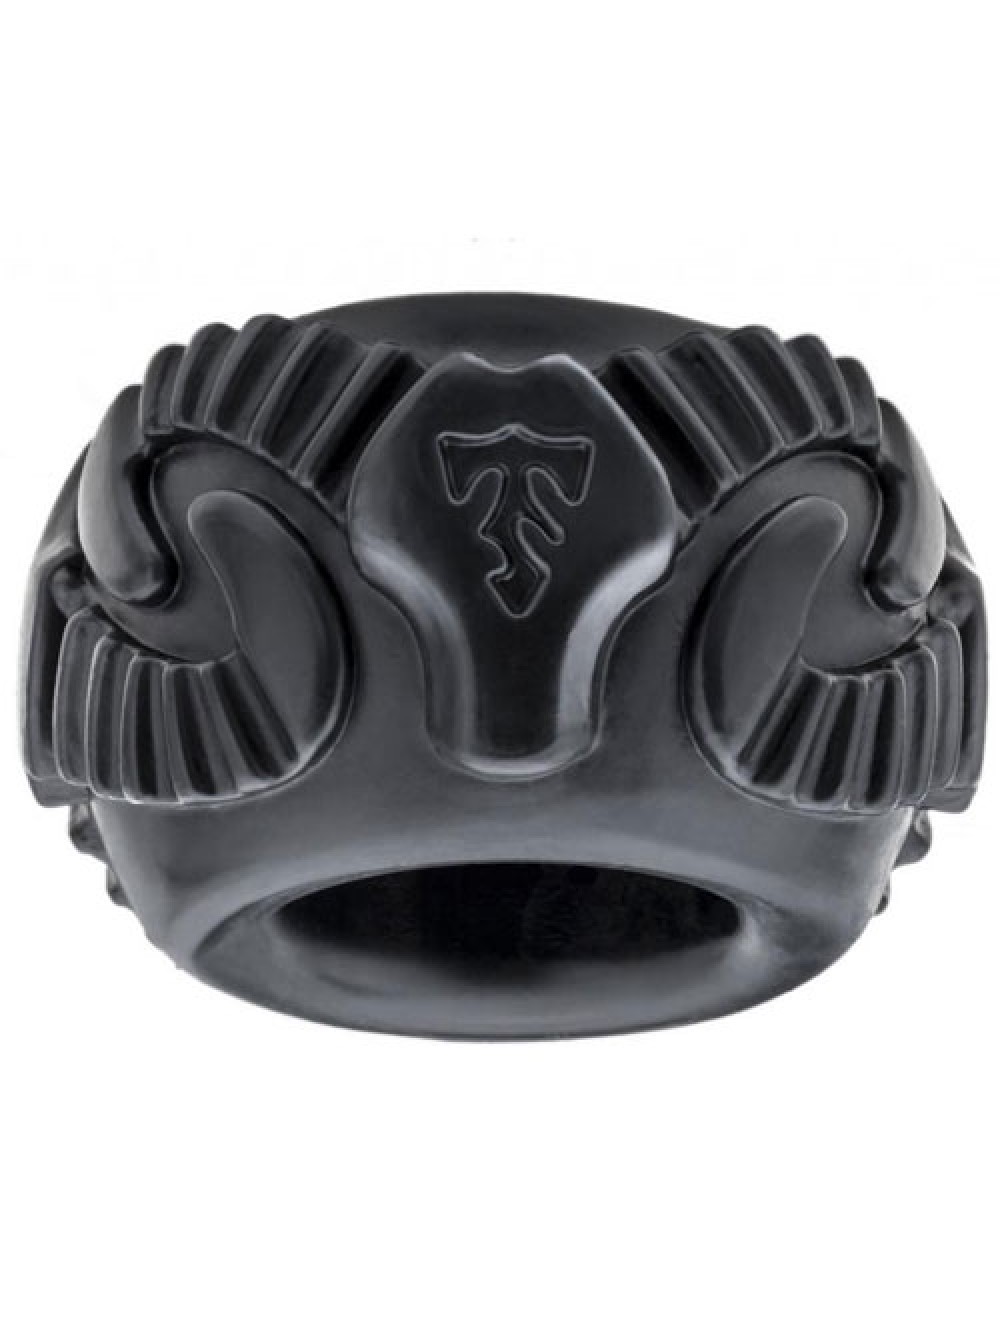 Perfect Fit Son Tribal Ram Ring 2 Black Pack